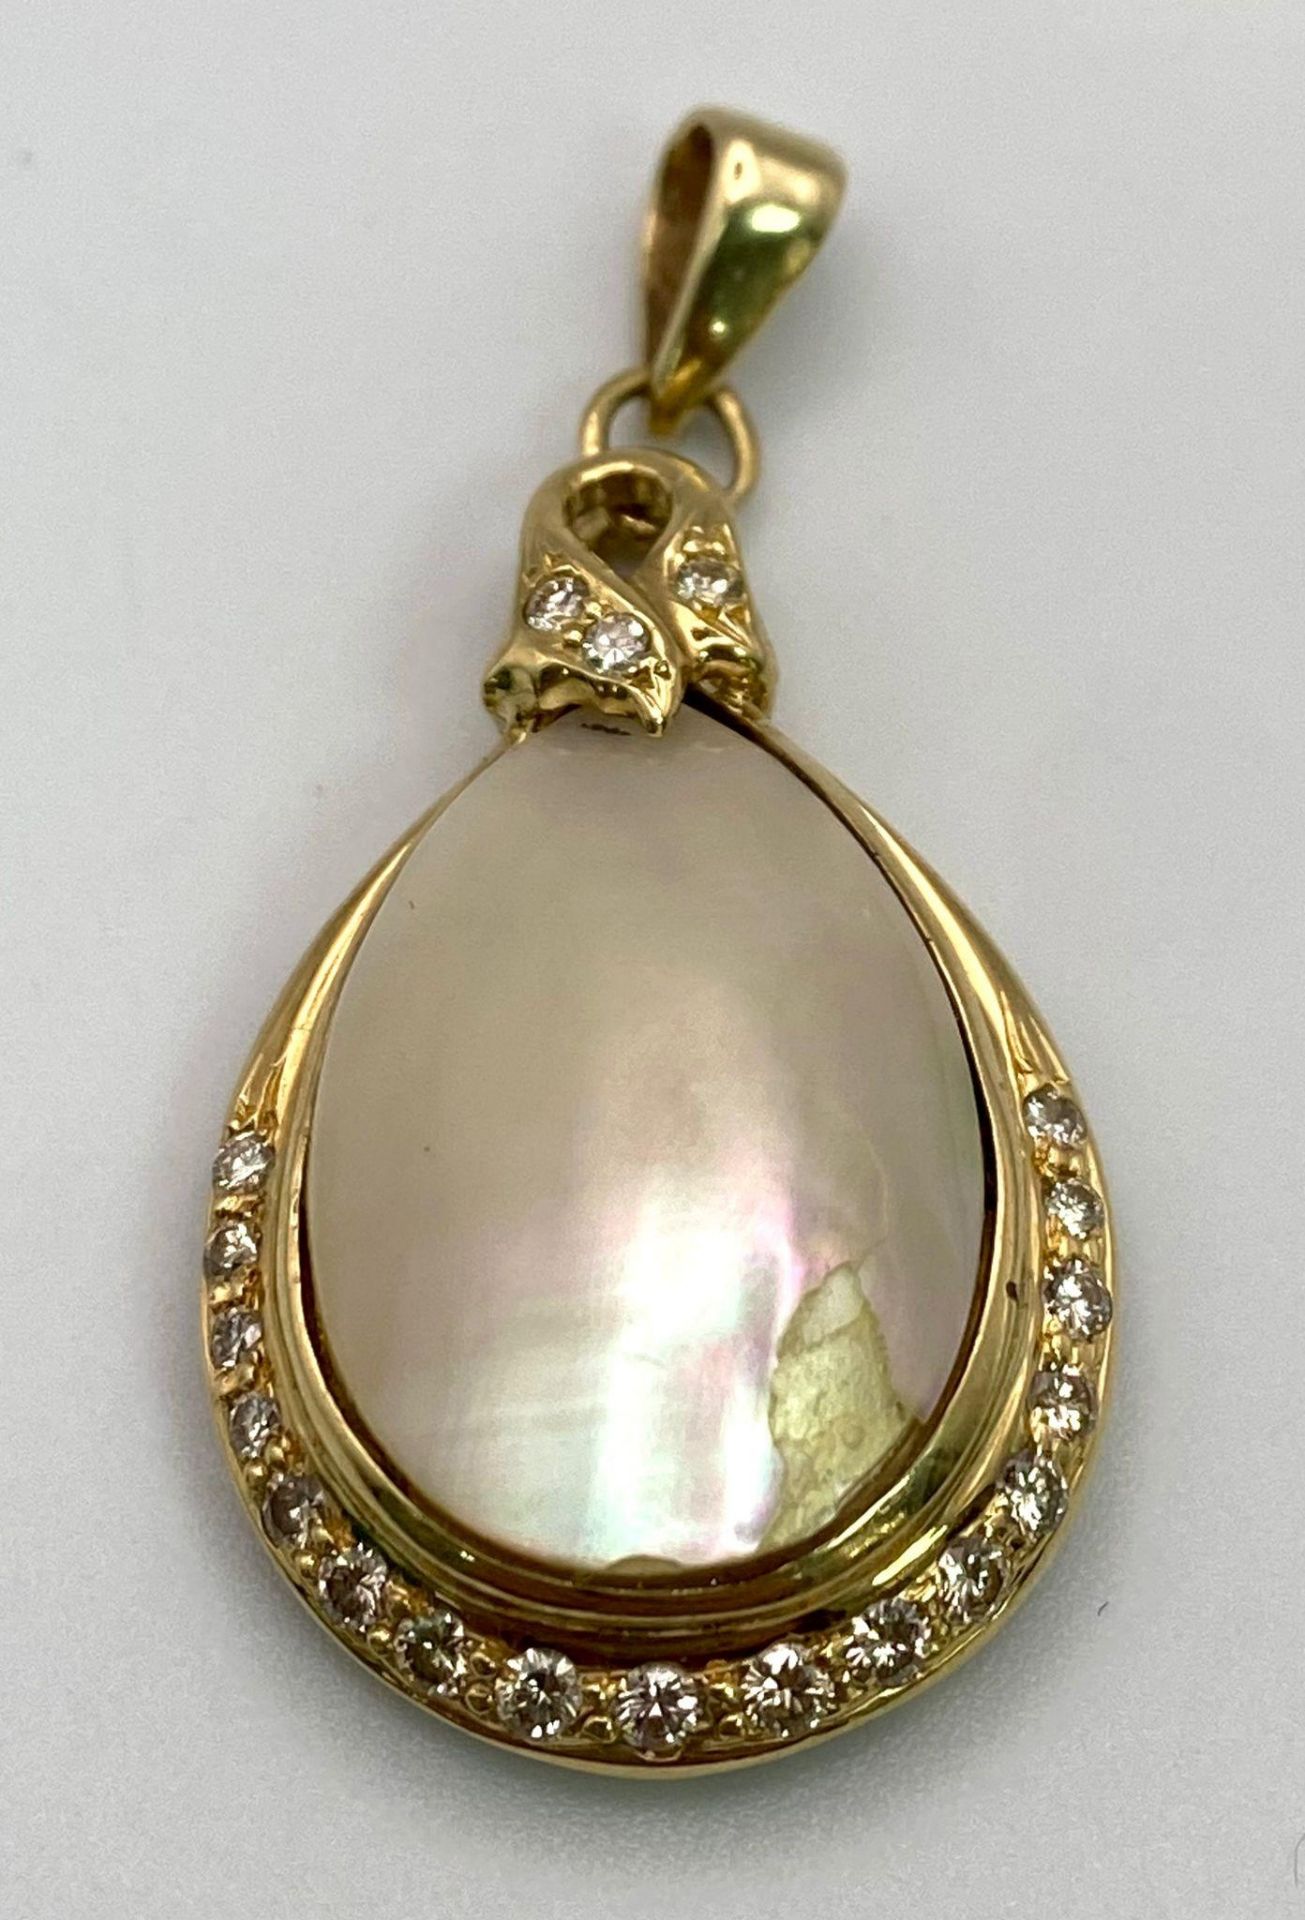 An 18K Yellow Gold, Diamond and Mother of Pearl Pendant. Teardrop Mother of Pearl cabochon with